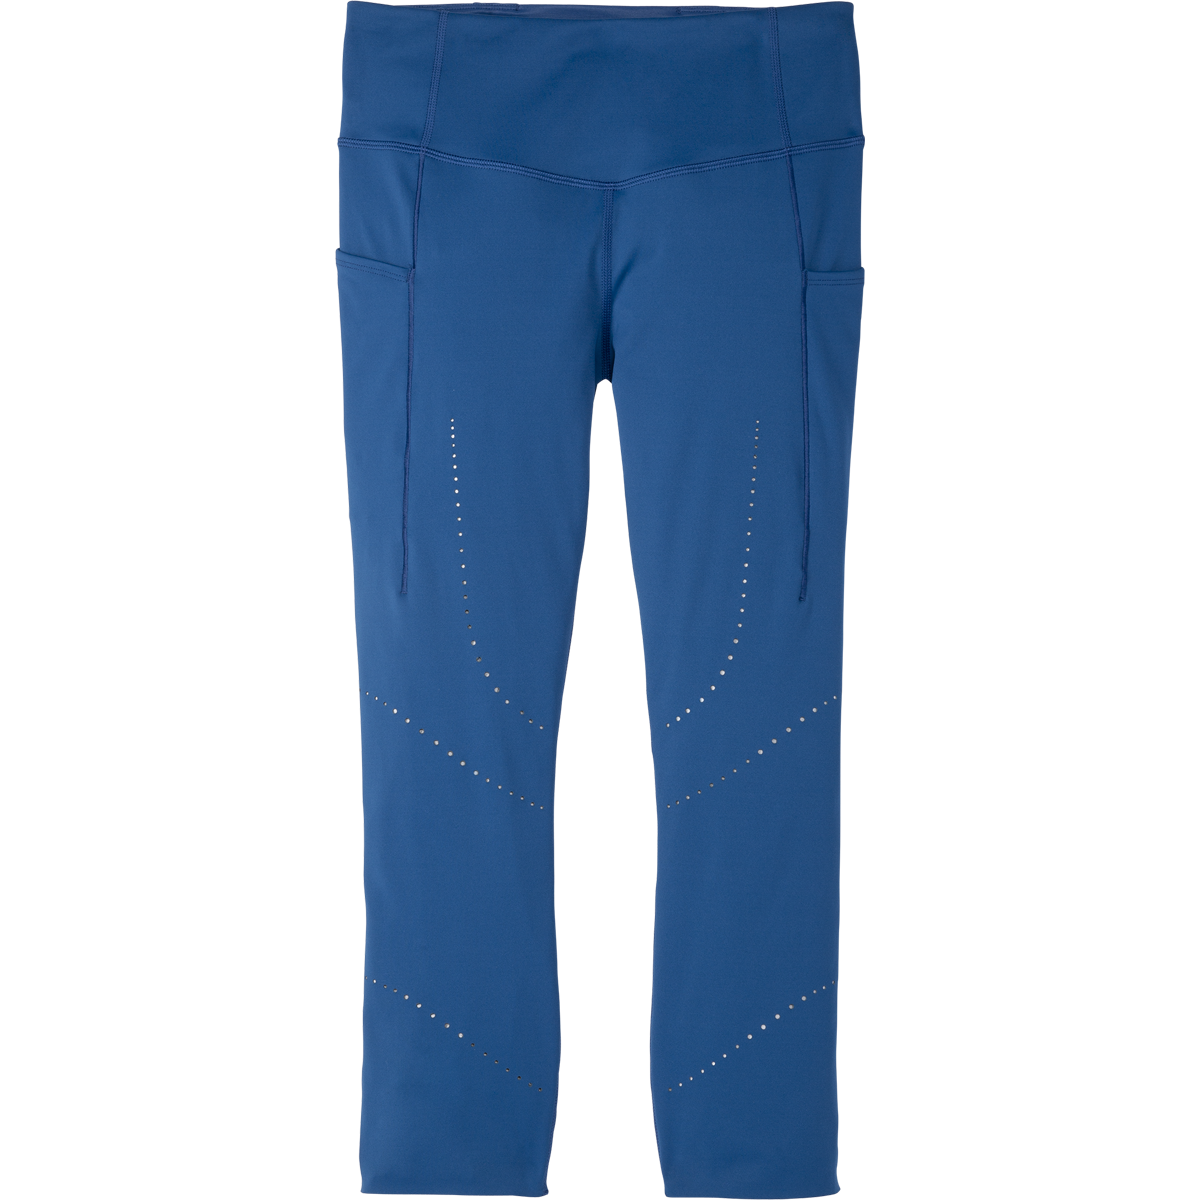 Patagonia Womens Centered TightsSpace Dye: Dolomite Blue / XL